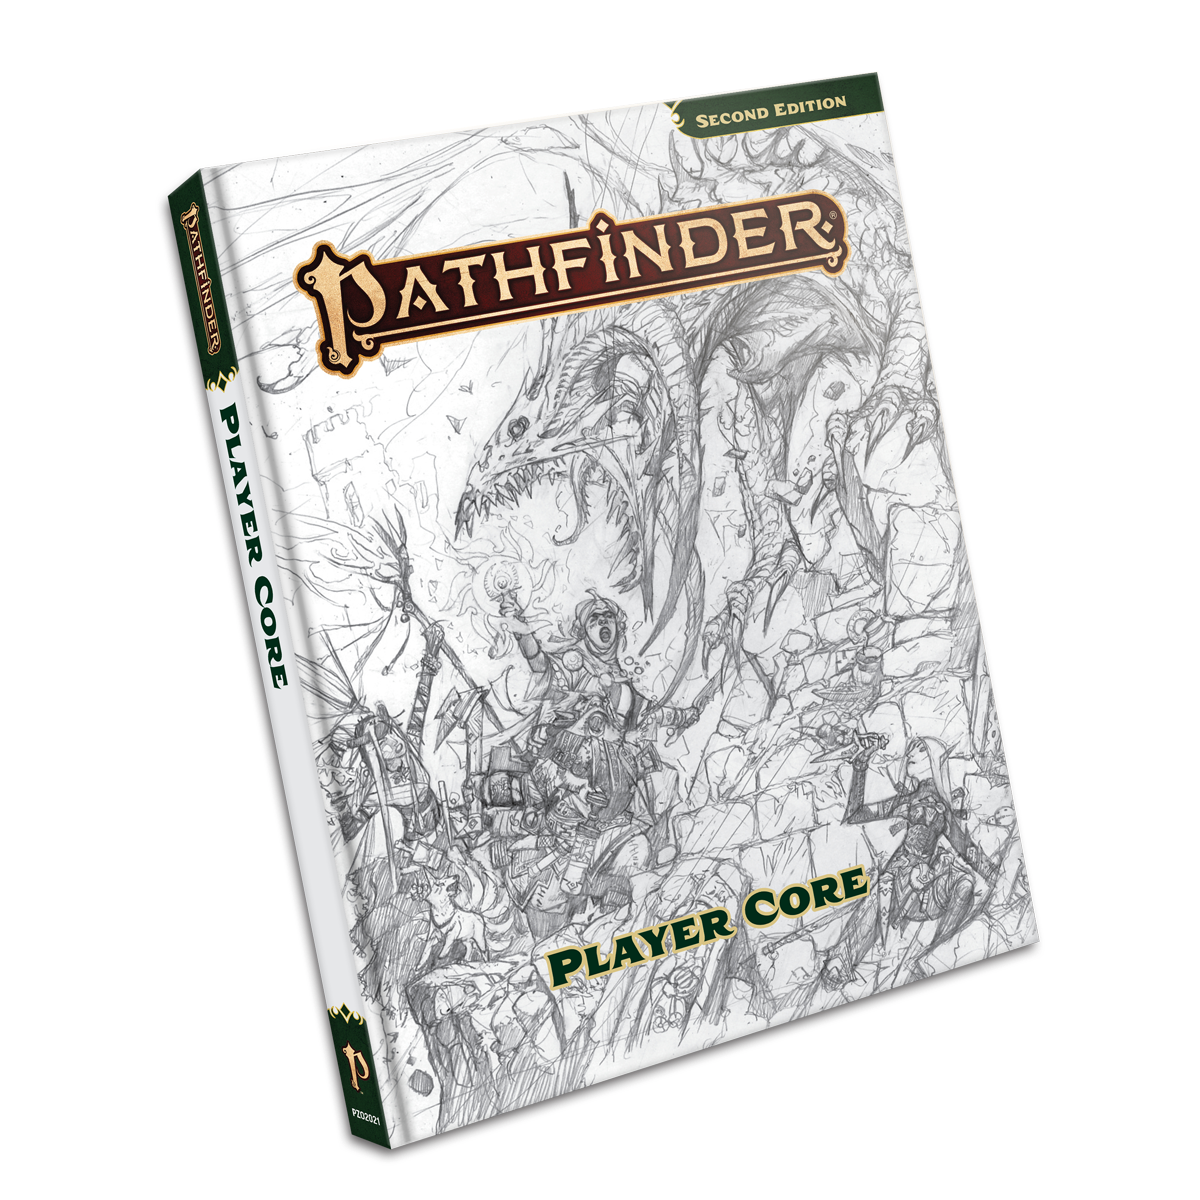 Pathfinder 2E Player Core Sketch Cover